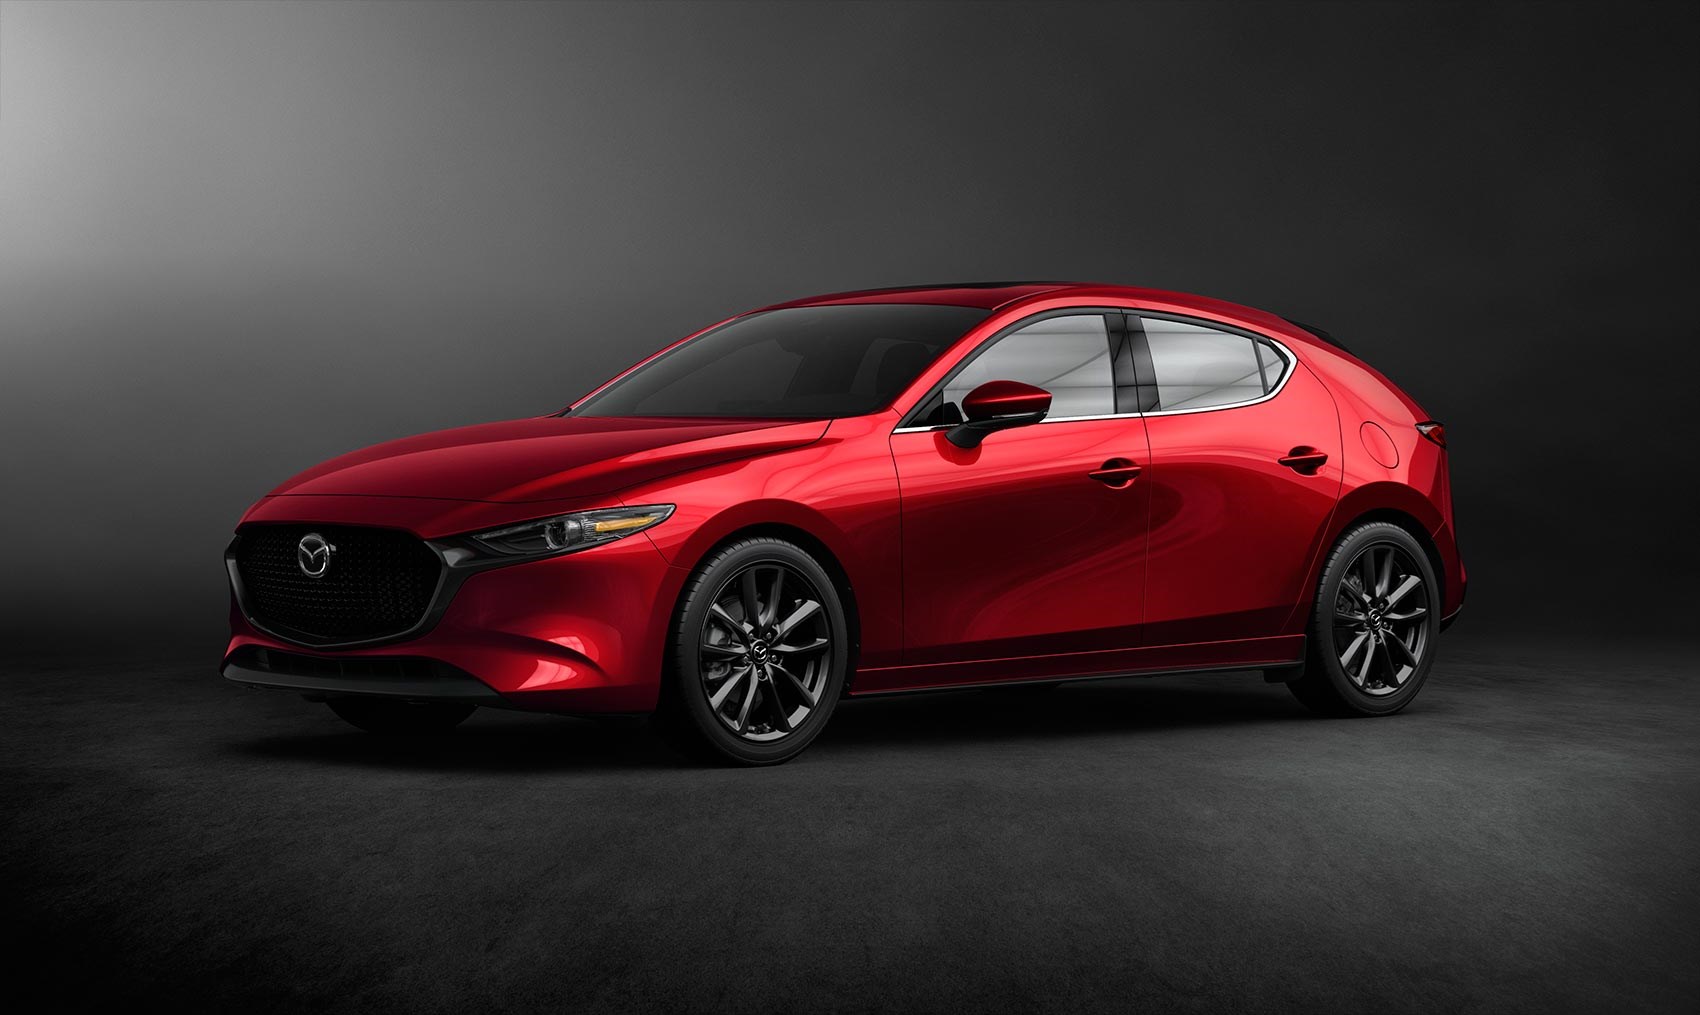 New 2019 Mazda 3 news and pictures CAR Magazine